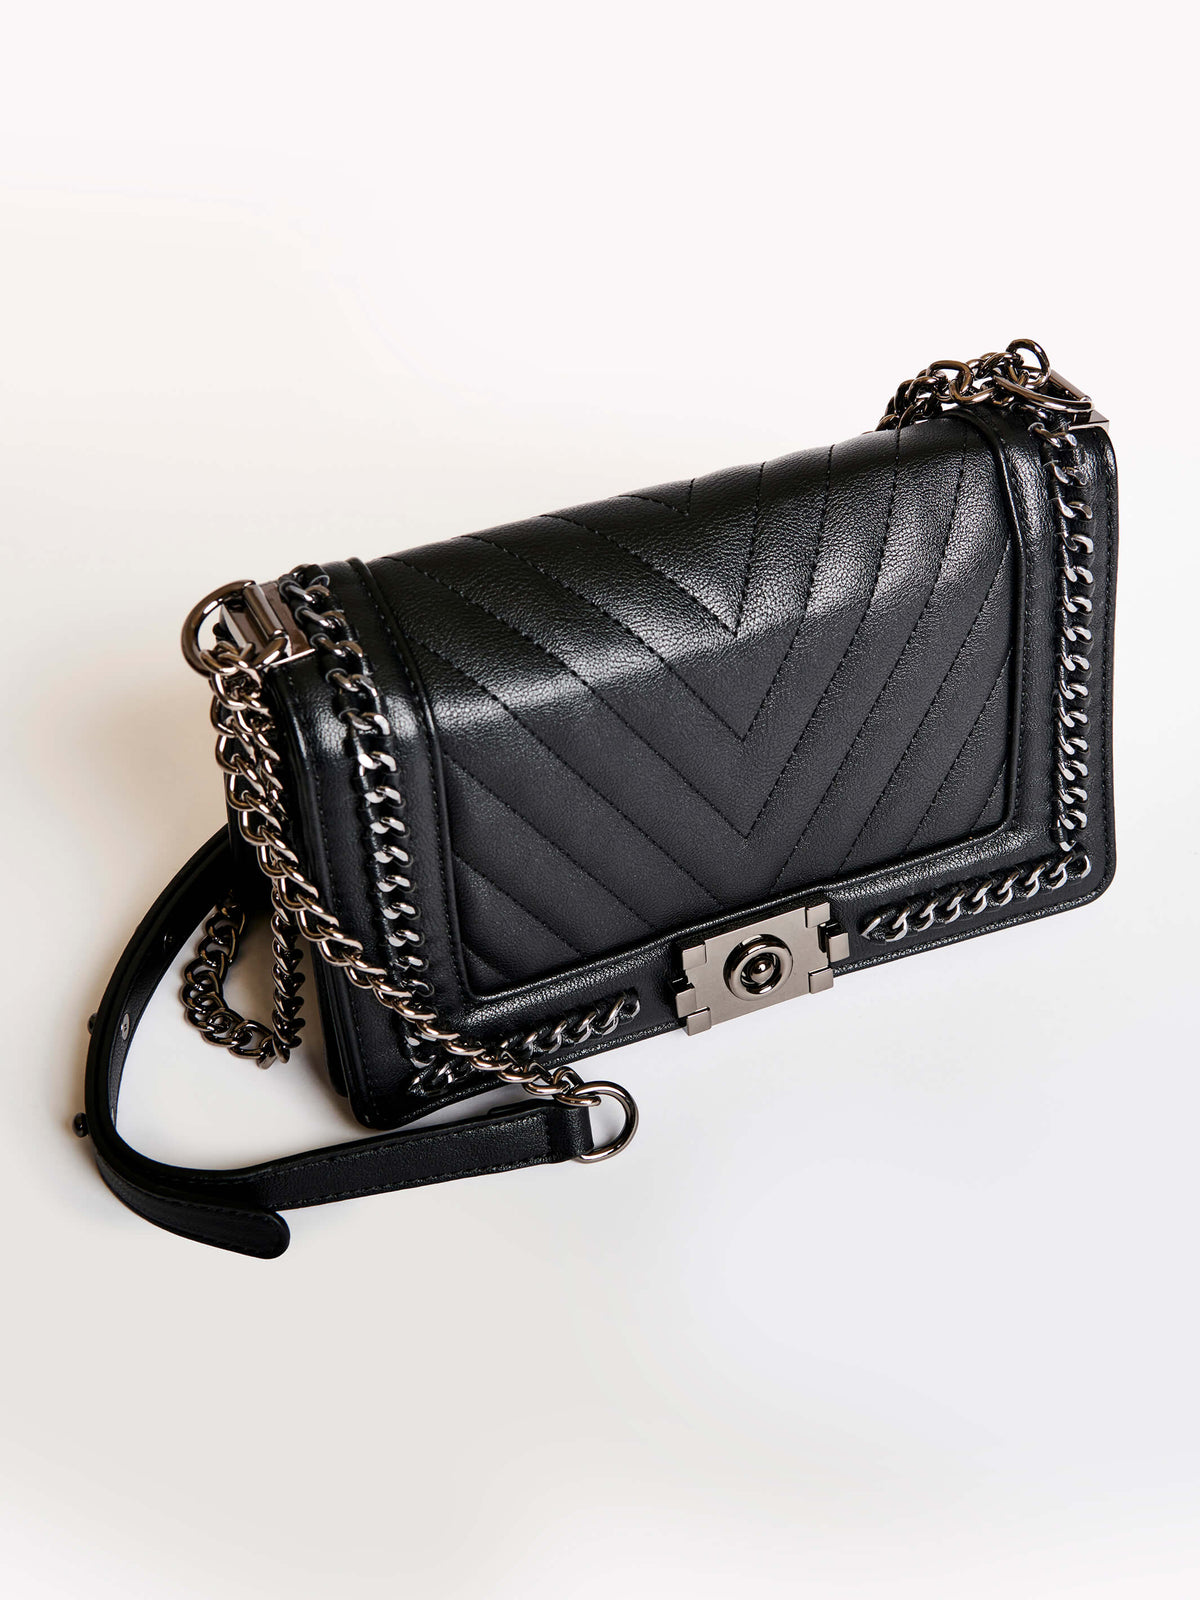 Black quilted purse with silver chain detail